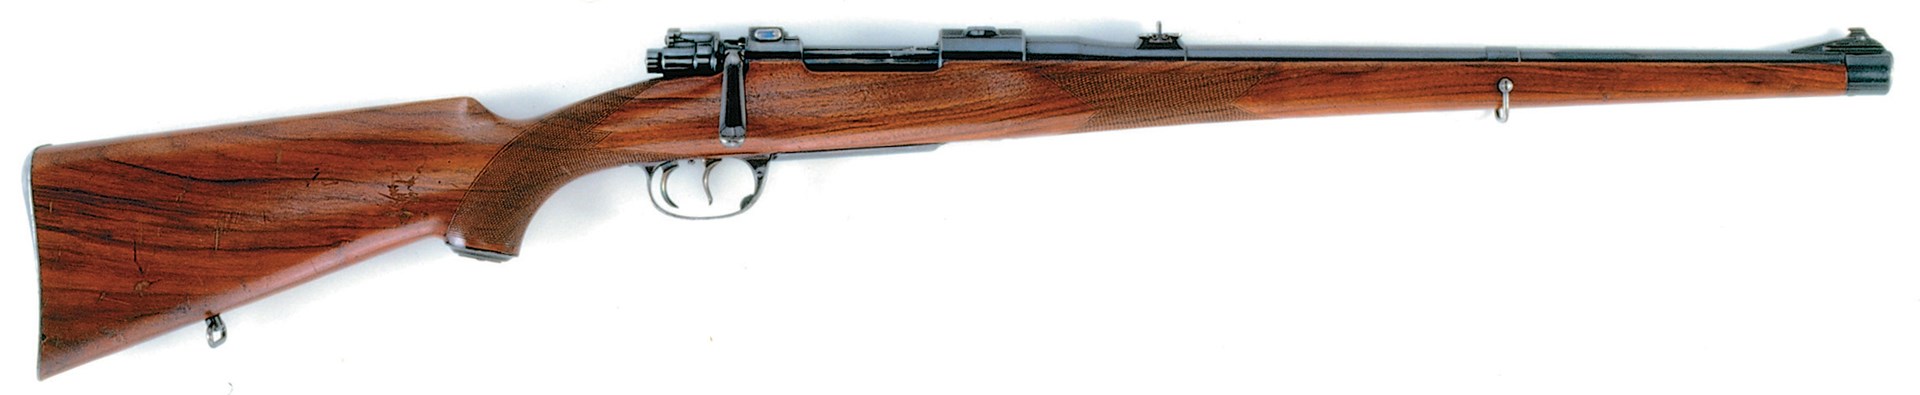 right side of masuer mannlicher bolt-action rifle wood stock